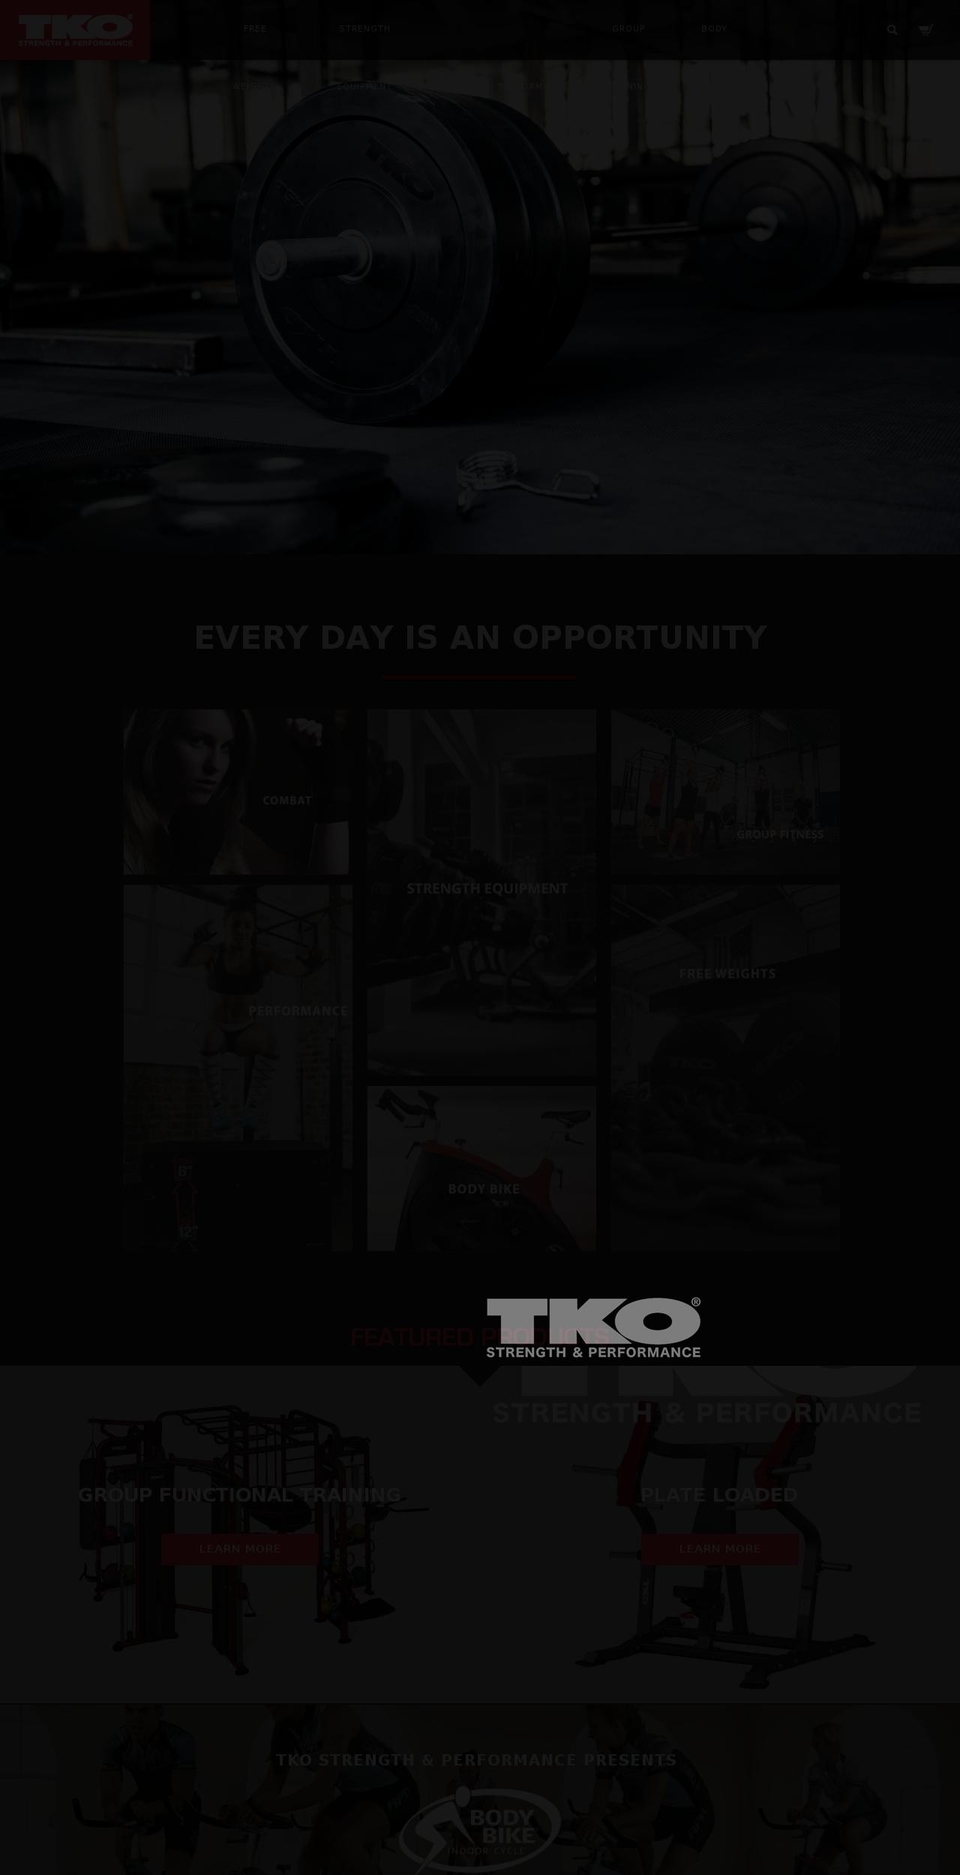 Sports Shopify theme site example tkostrength.com